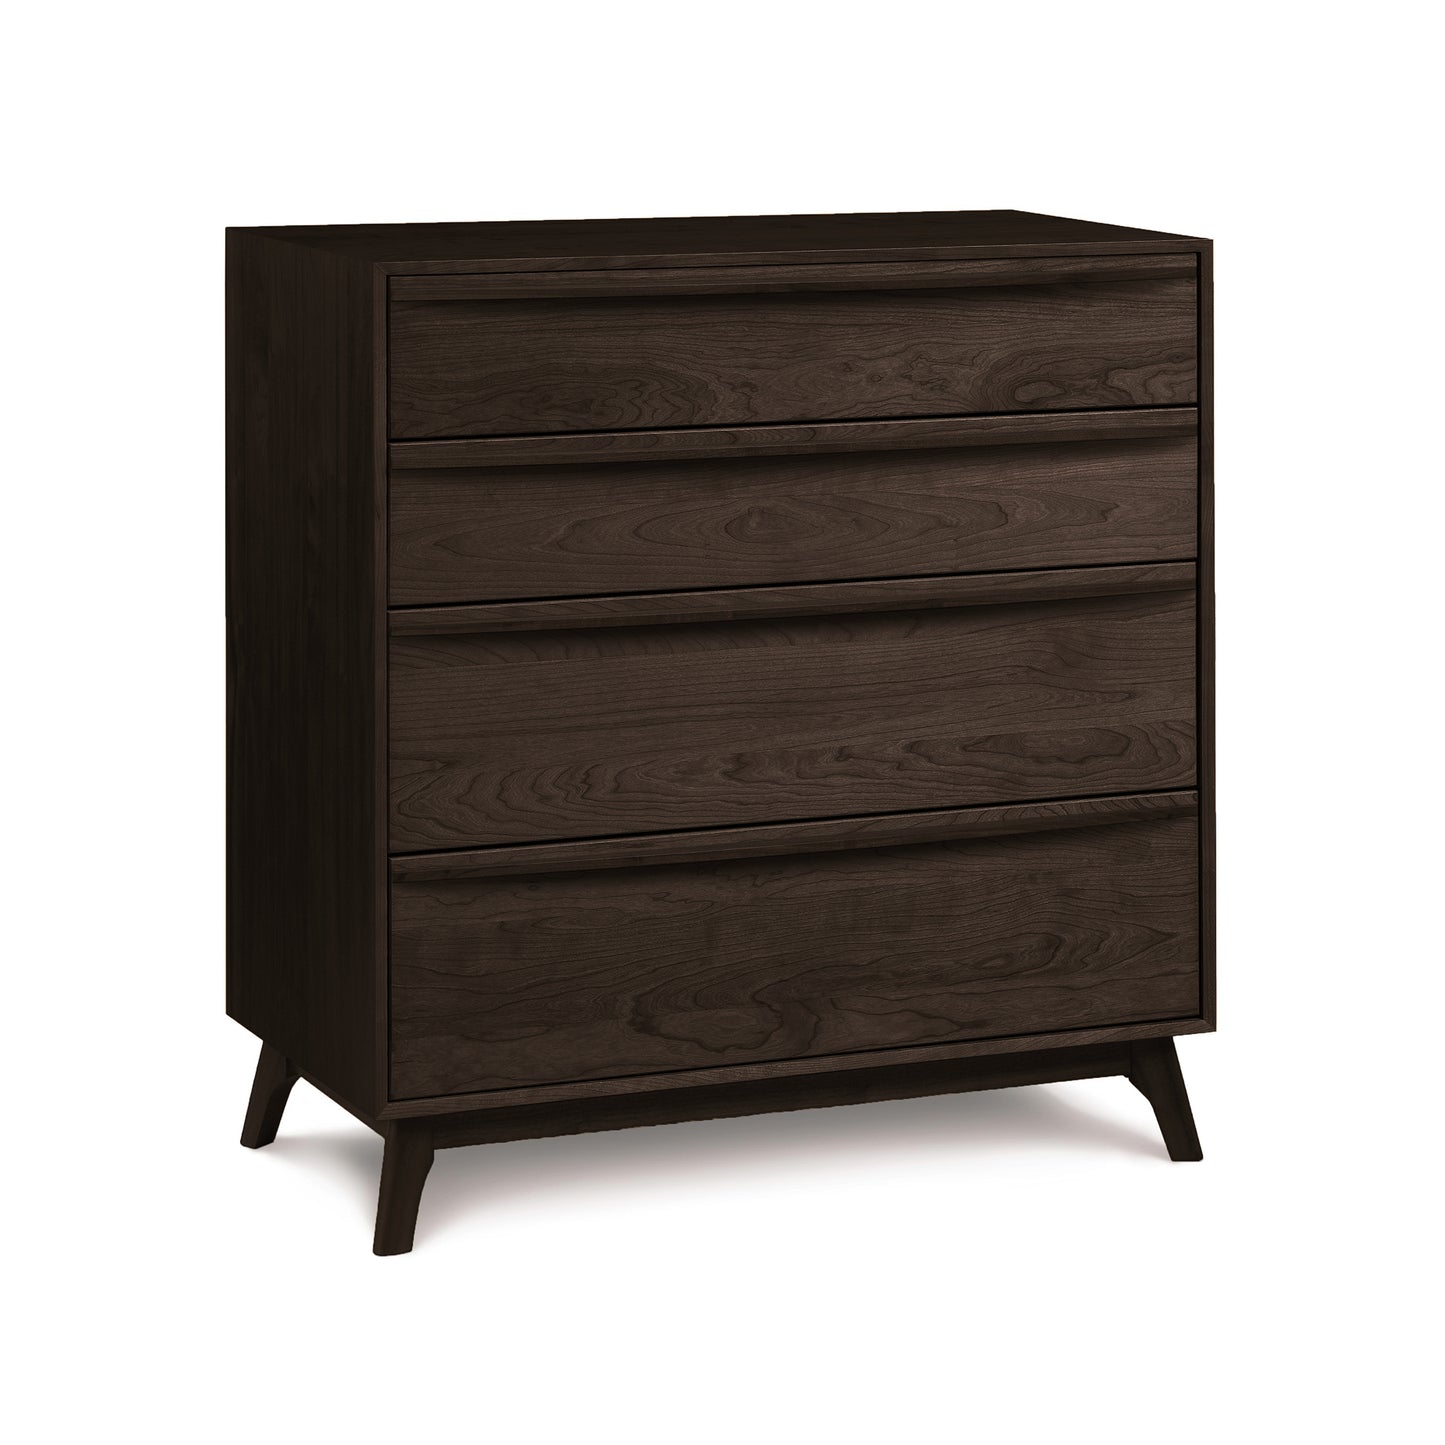 A modern Copeland Furniture Catalina 4-Drawer Chest, handmade in Vermont, showcased on a white background.